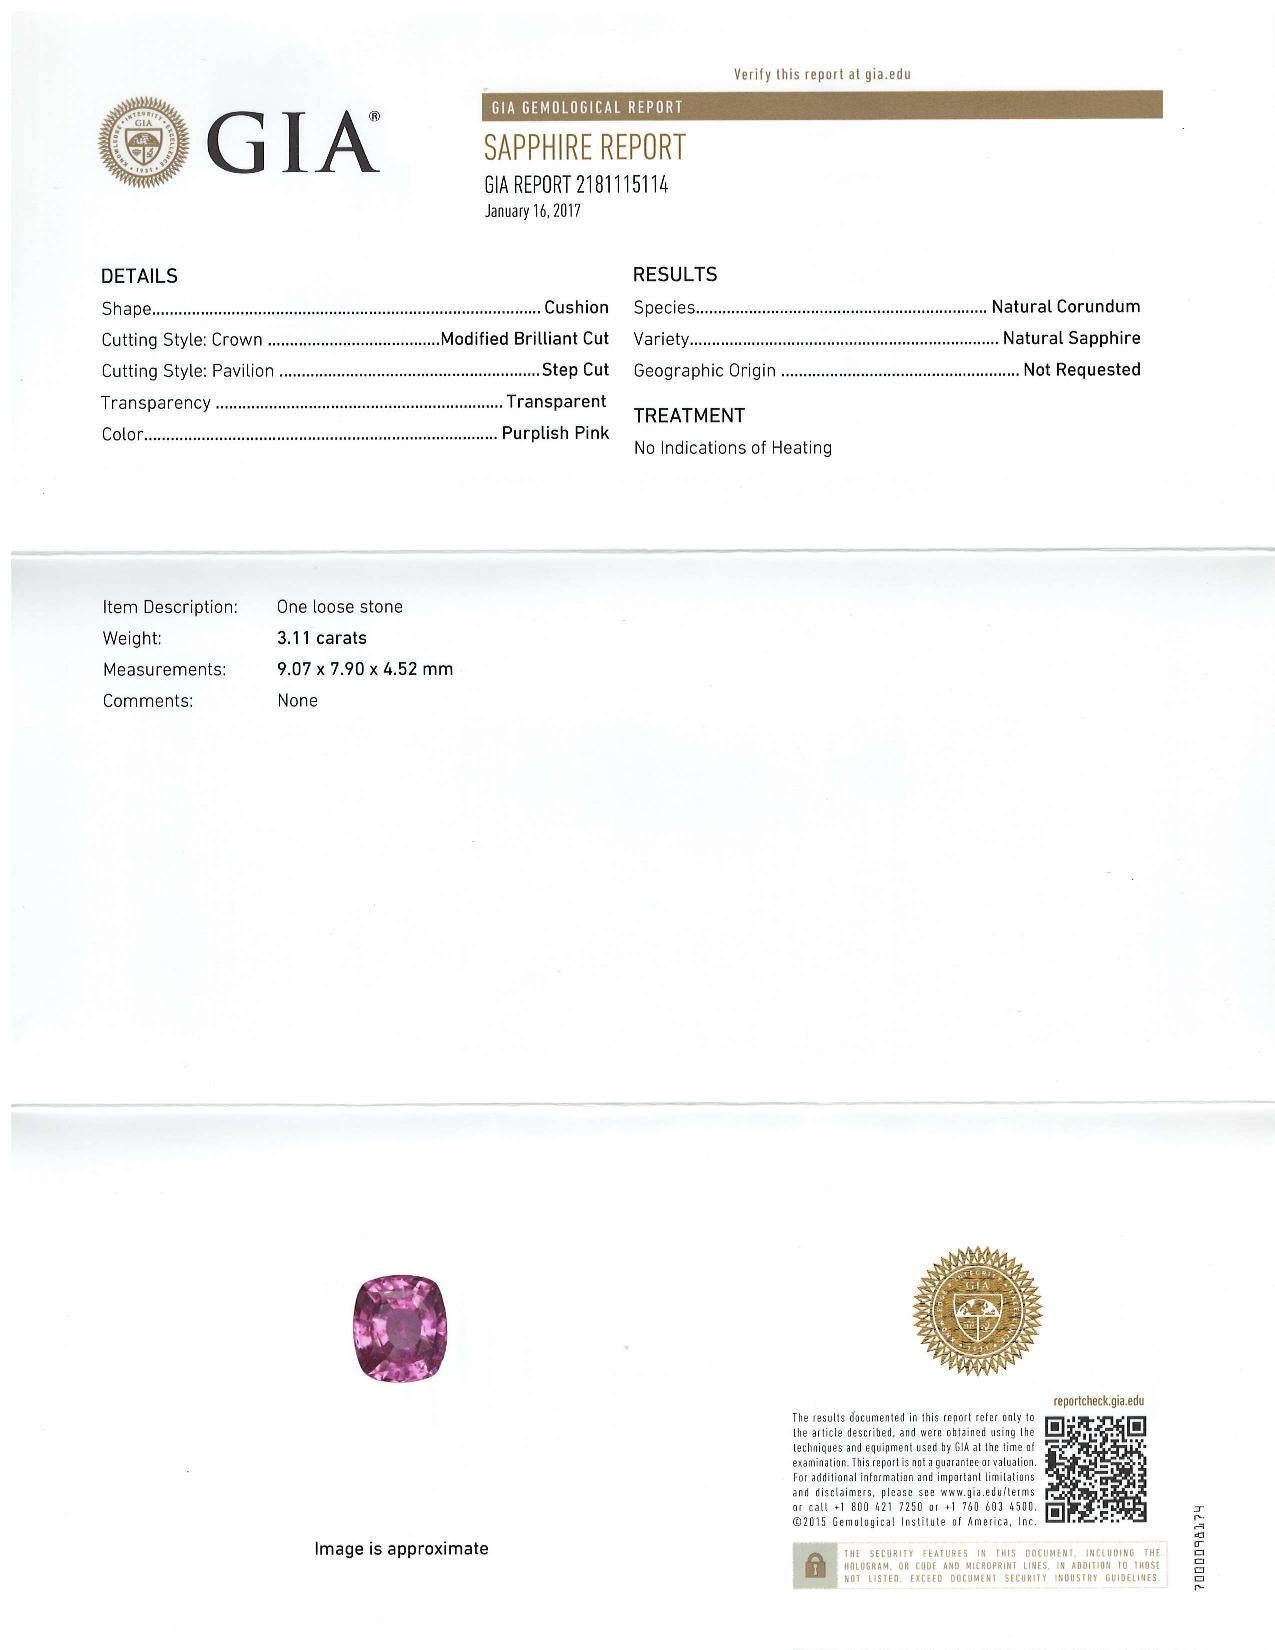 Women's or Men's Unheated 3.11 Carat Purple Pink Sapphire, Unset Loose Gemstone, GIA Certified For Sale